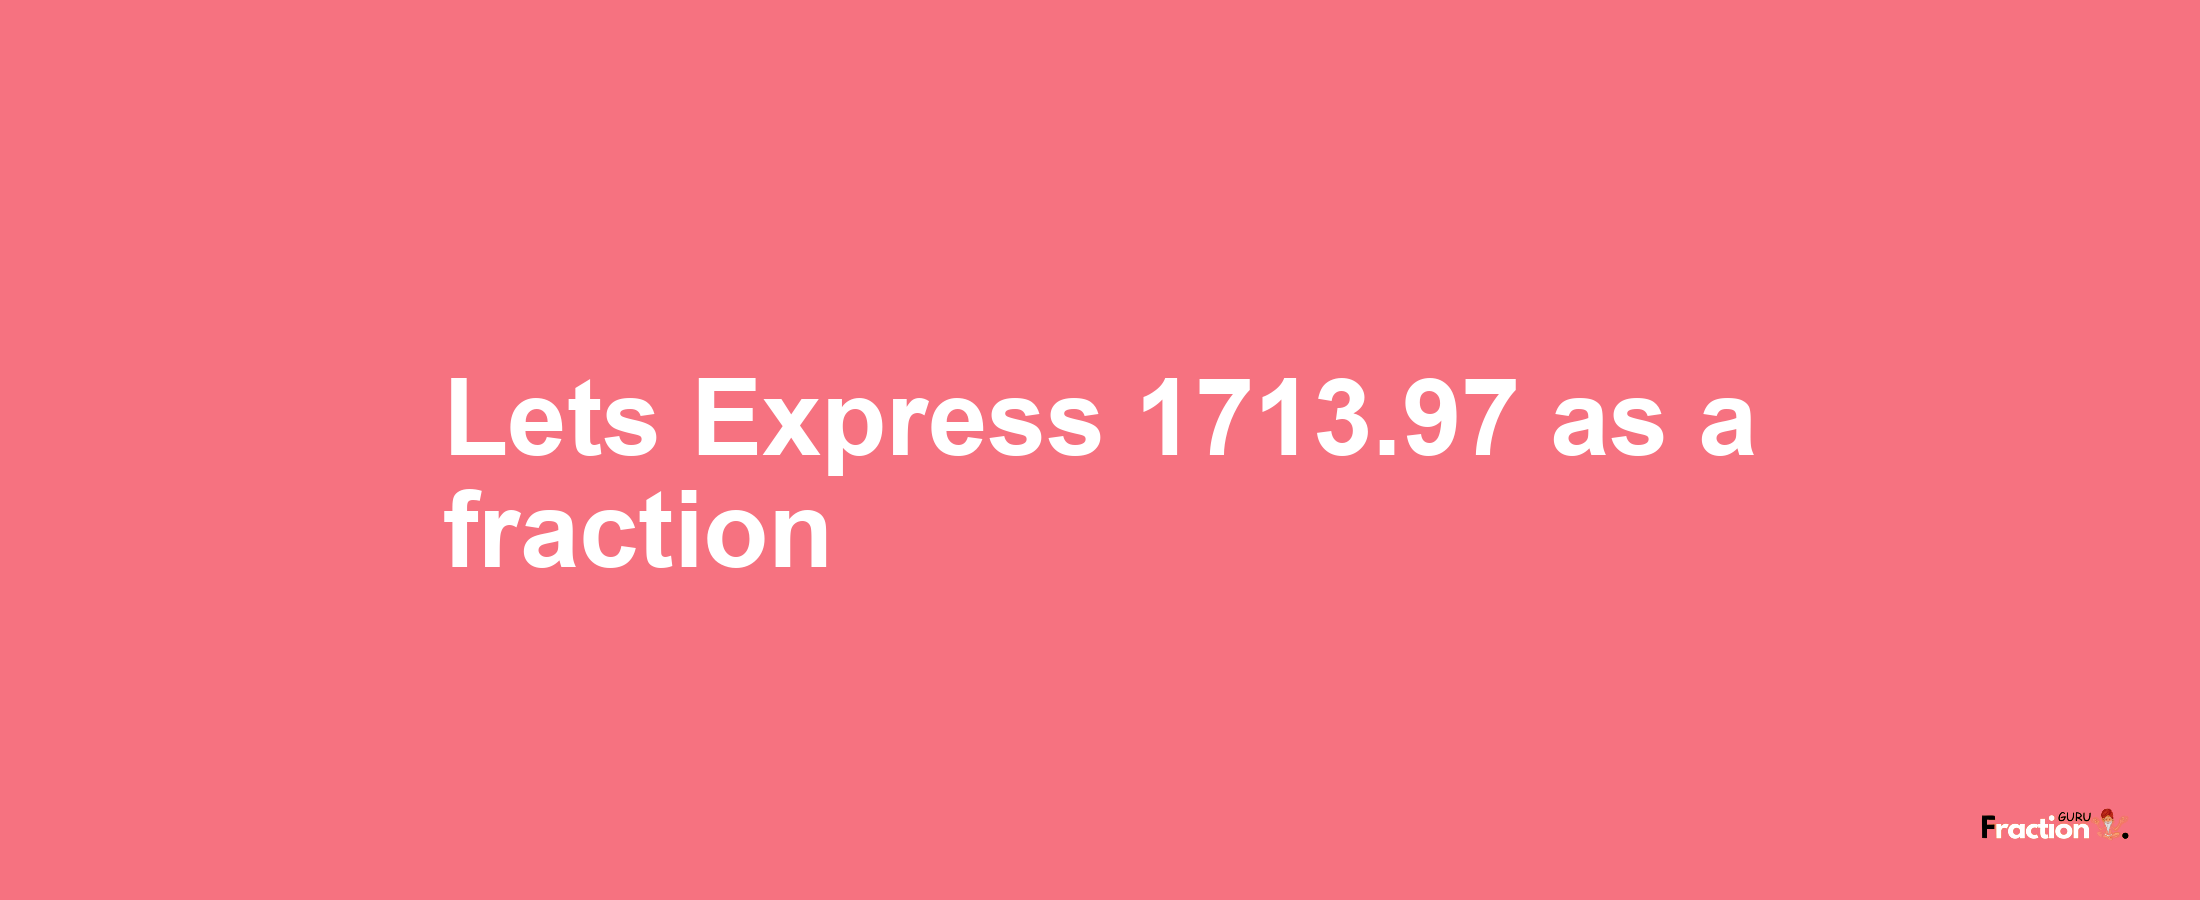 Lets Express 1713.97 as afraction